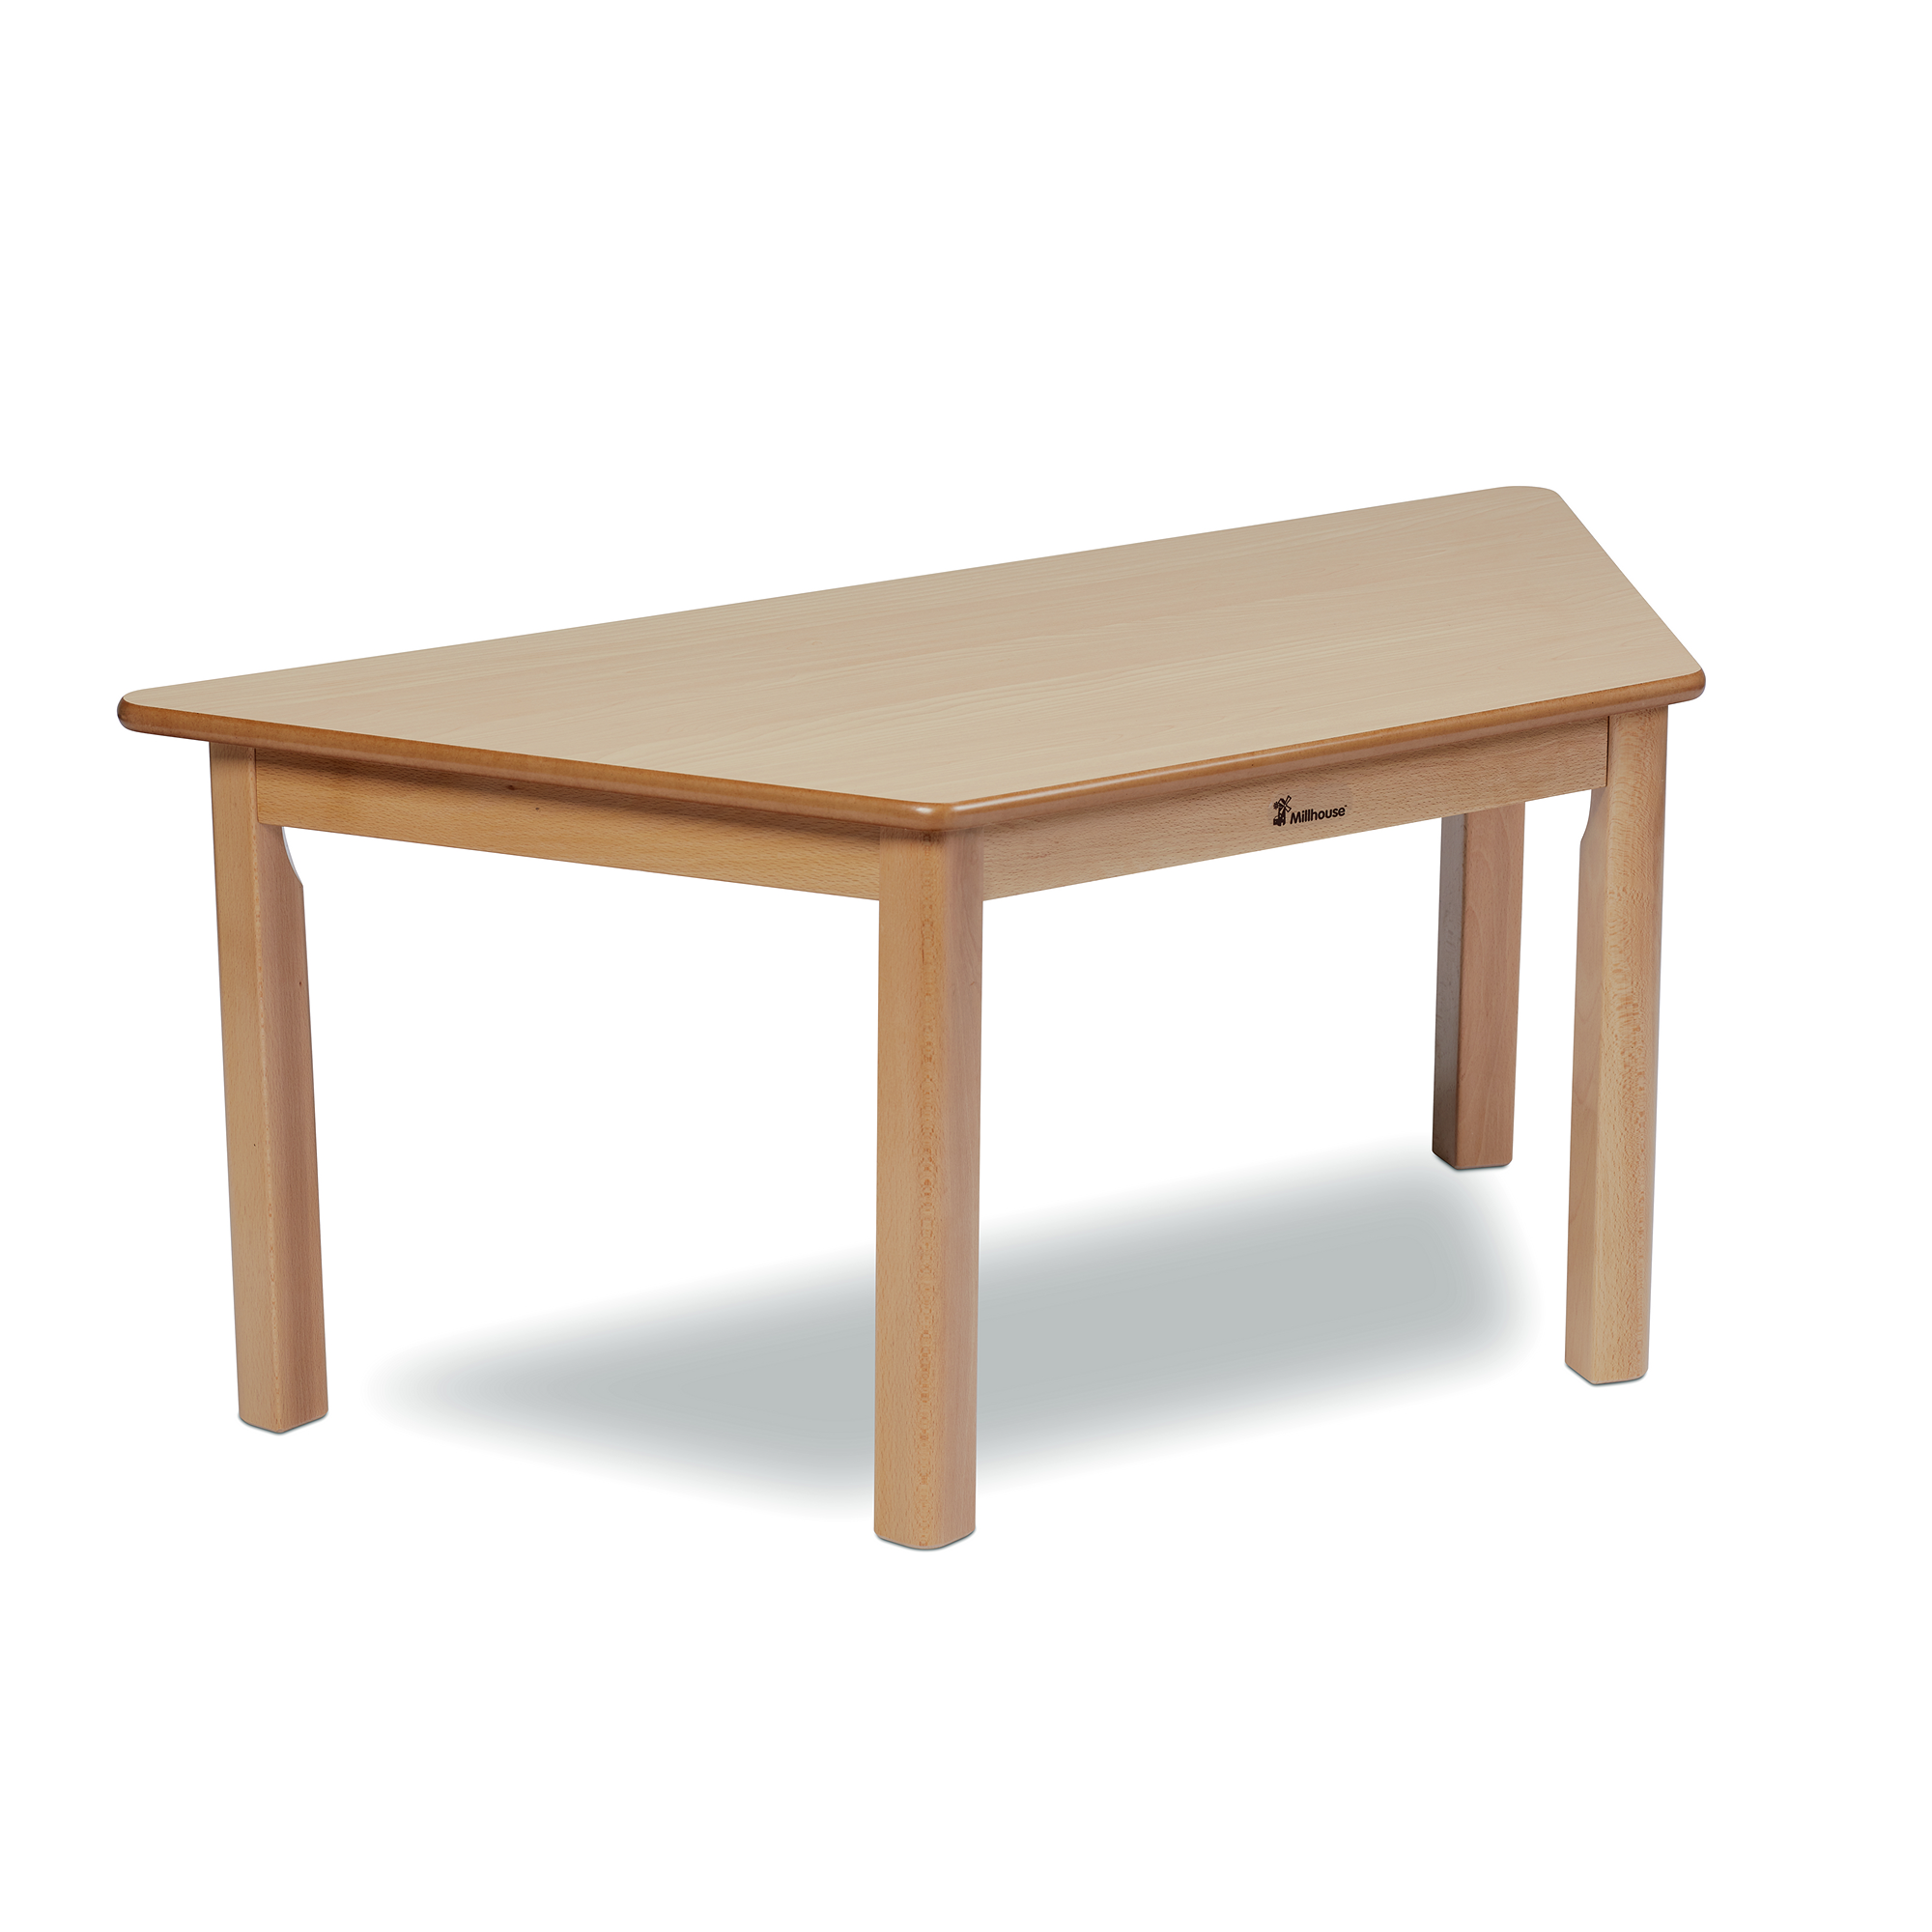 Trapezoid Table - 460mm Height